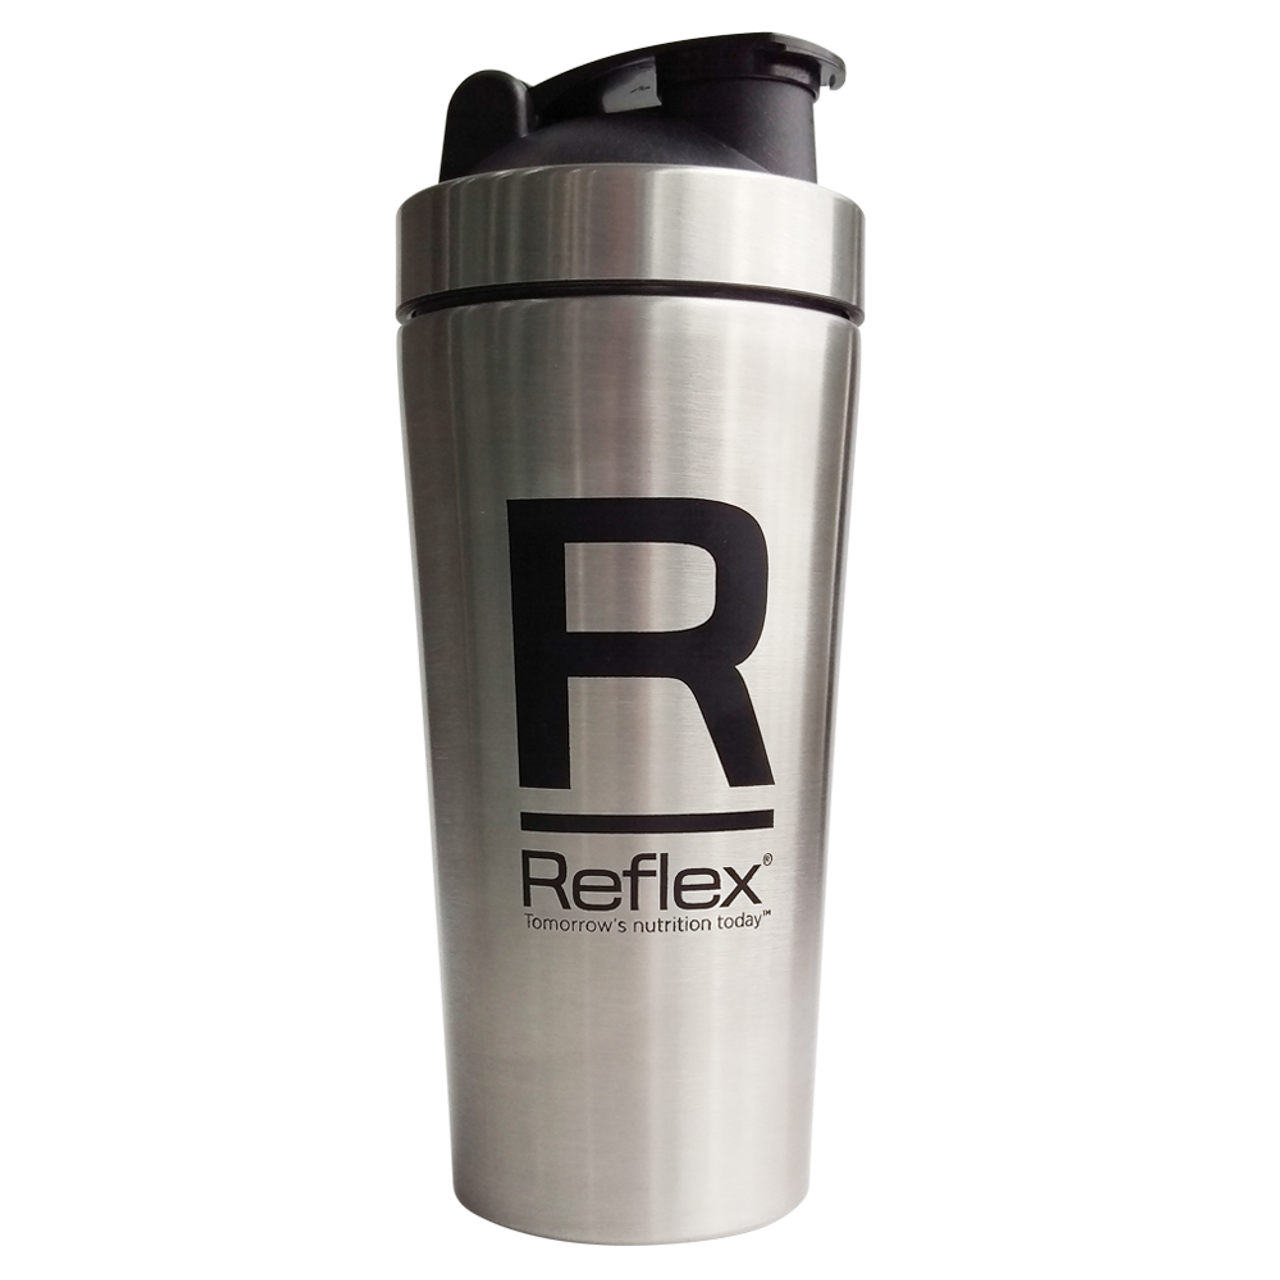 https://cdn11.bigcommerce.com/s-xxrca37v61/images/stencil/1280x1280/products/336/993/reflex-nutrition-reflex-stainless-steel-shaker__56980.1483488050.png?c=2